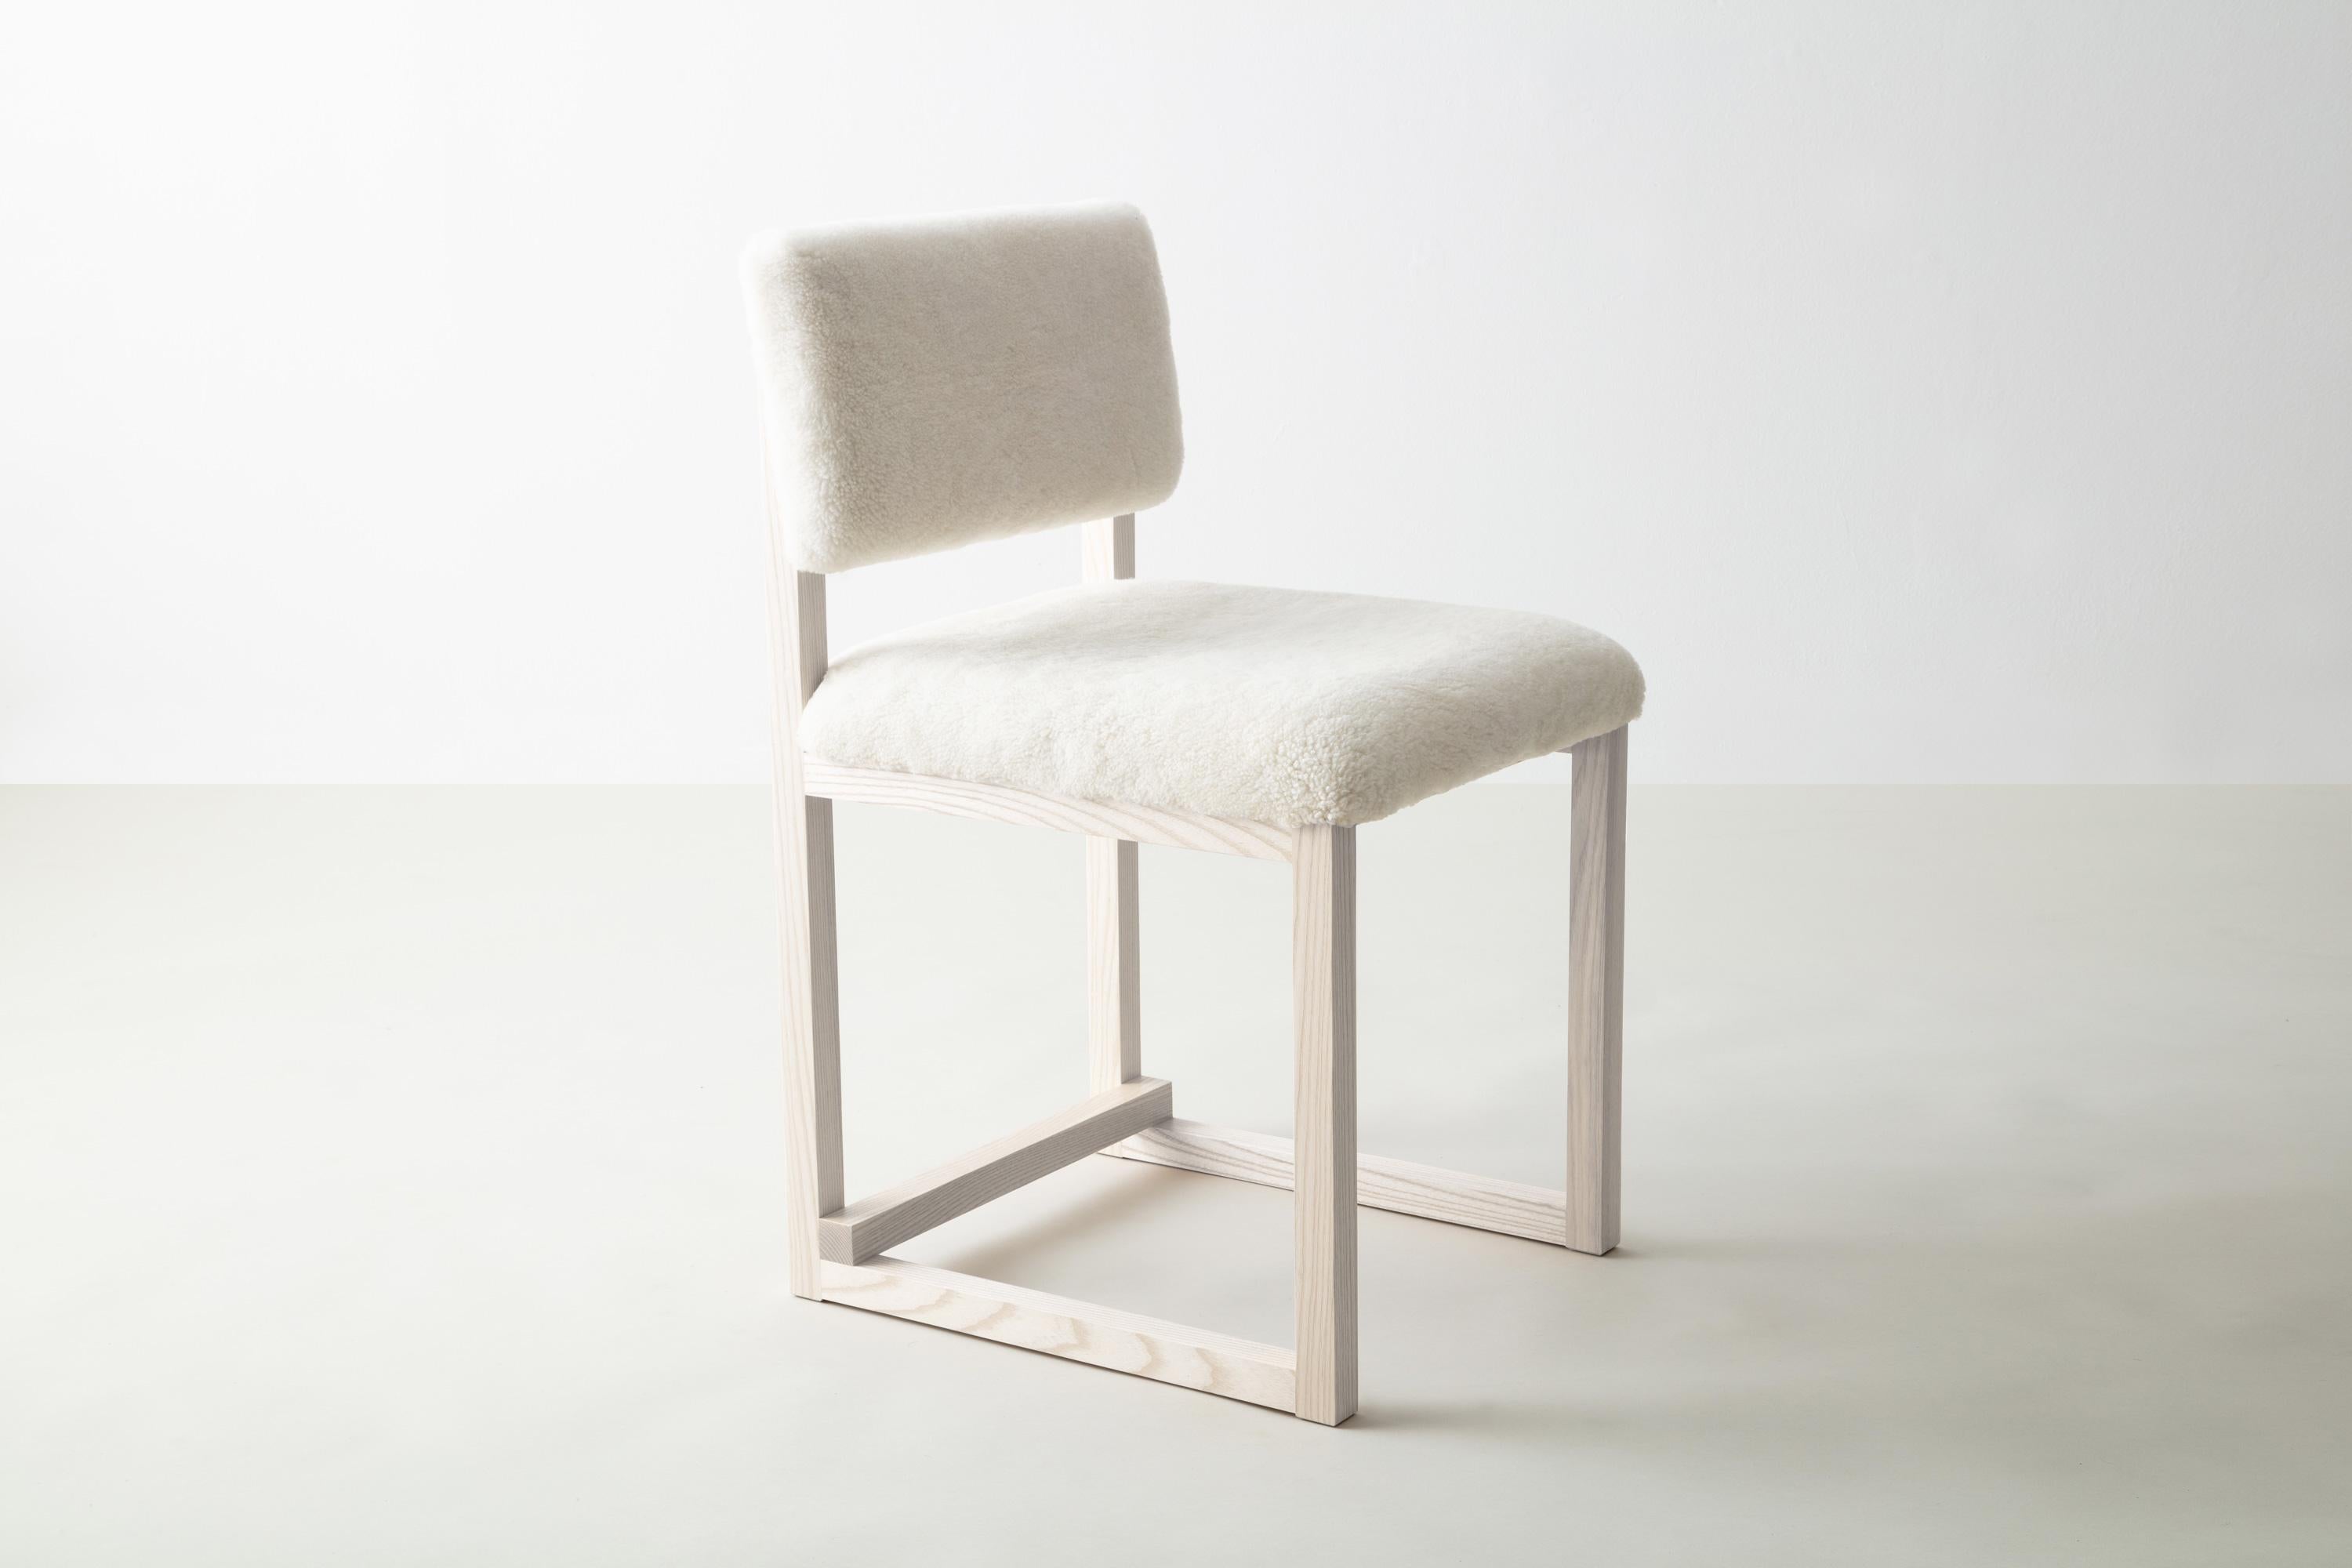 Shown in white washed ash and ebonized ash, cream shearling, and and brass hardware
 
Also available:
Wood in solid ash, cherry, maple, walnut, or white oak

Upholstery in customer’s own material or leather (COM+COL) 

Metal in brushed brass,